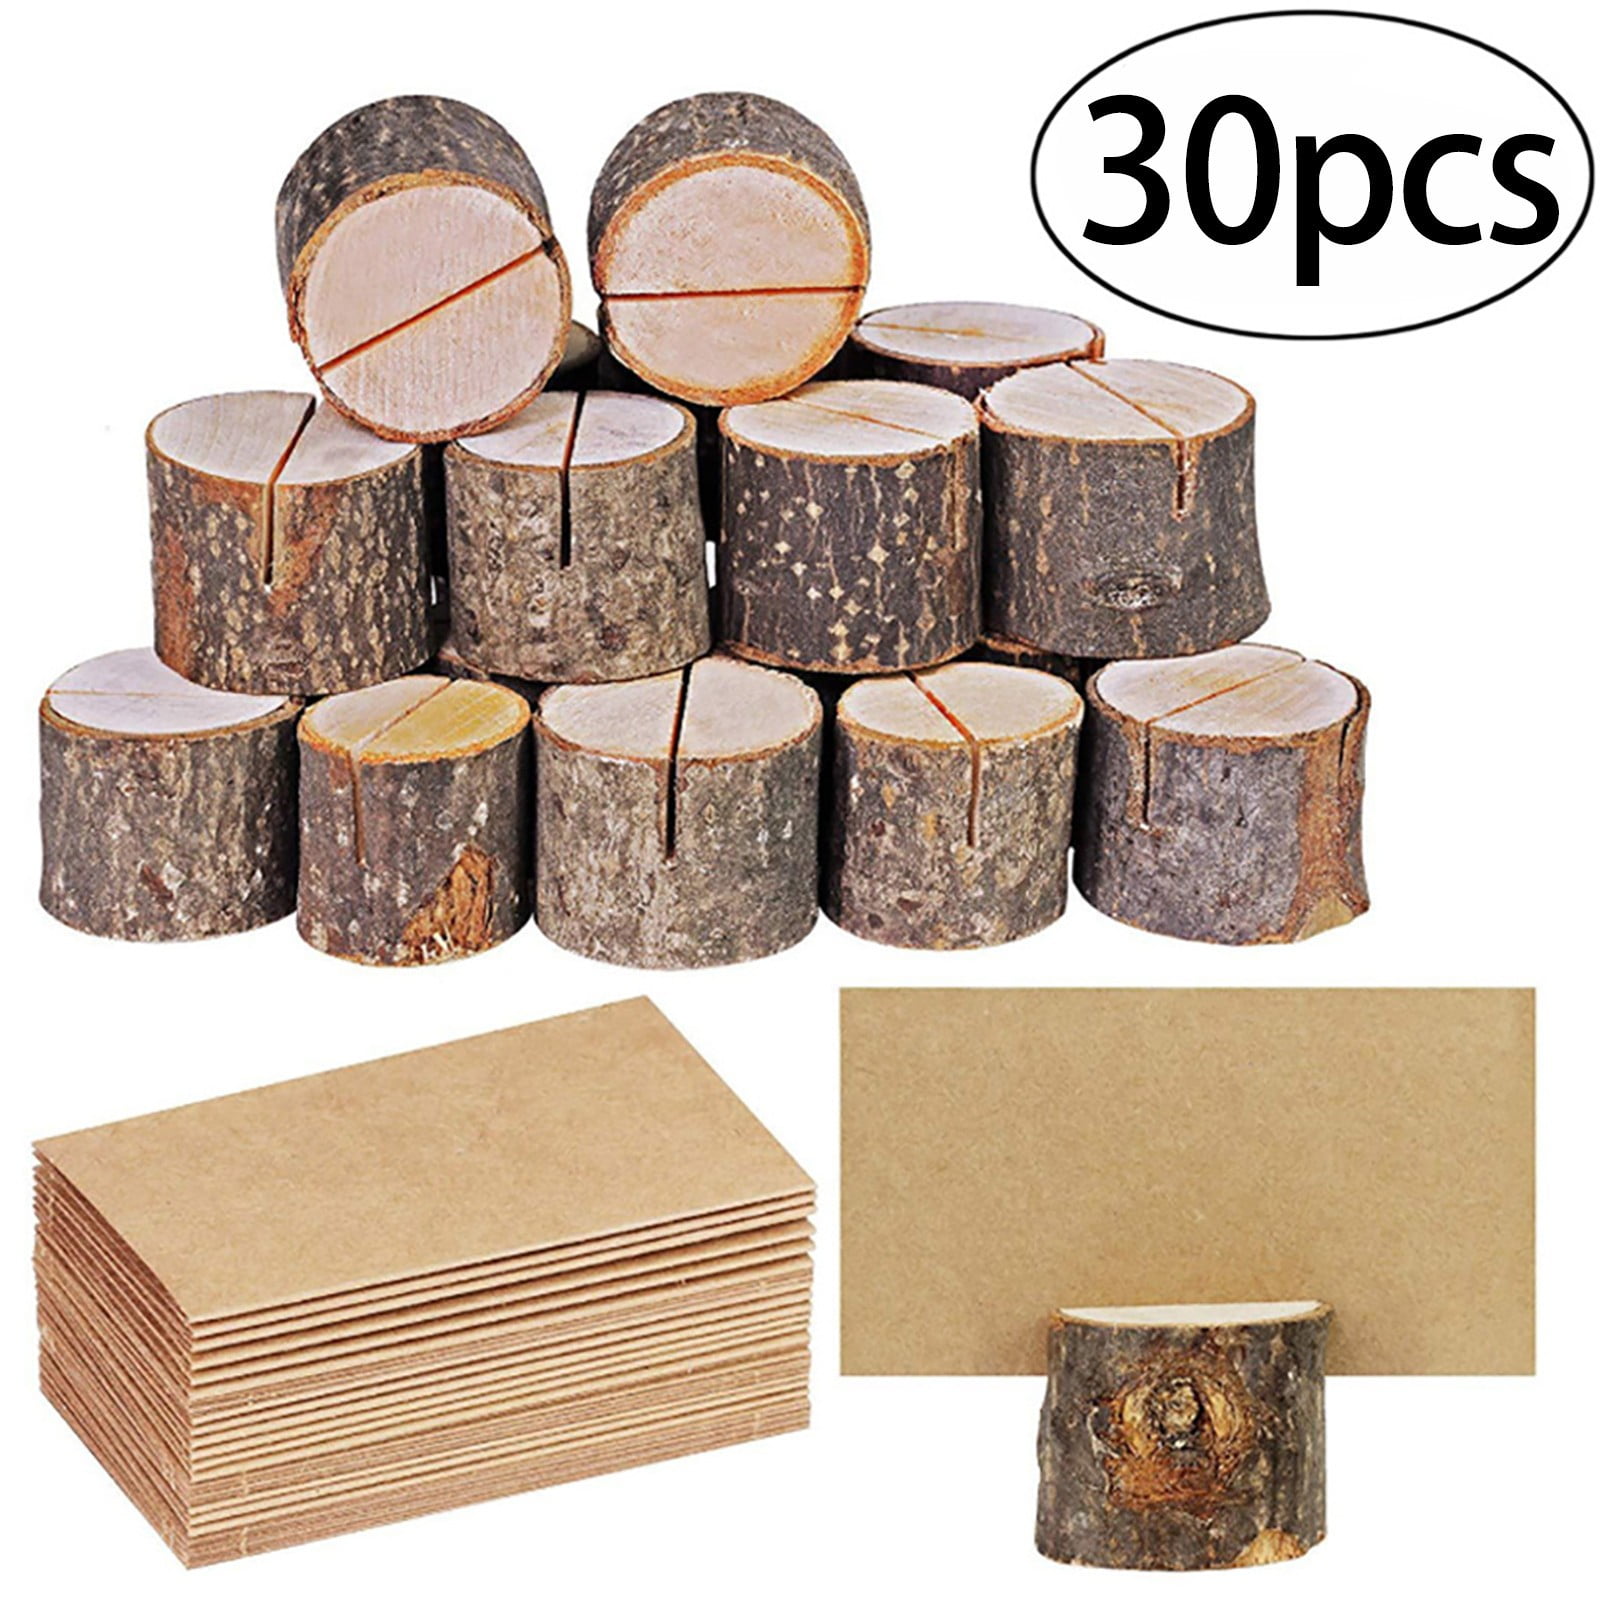 10x Chic Paper Name Place Cards Natural Wood Wedding Table Holder 53x27x28mm 